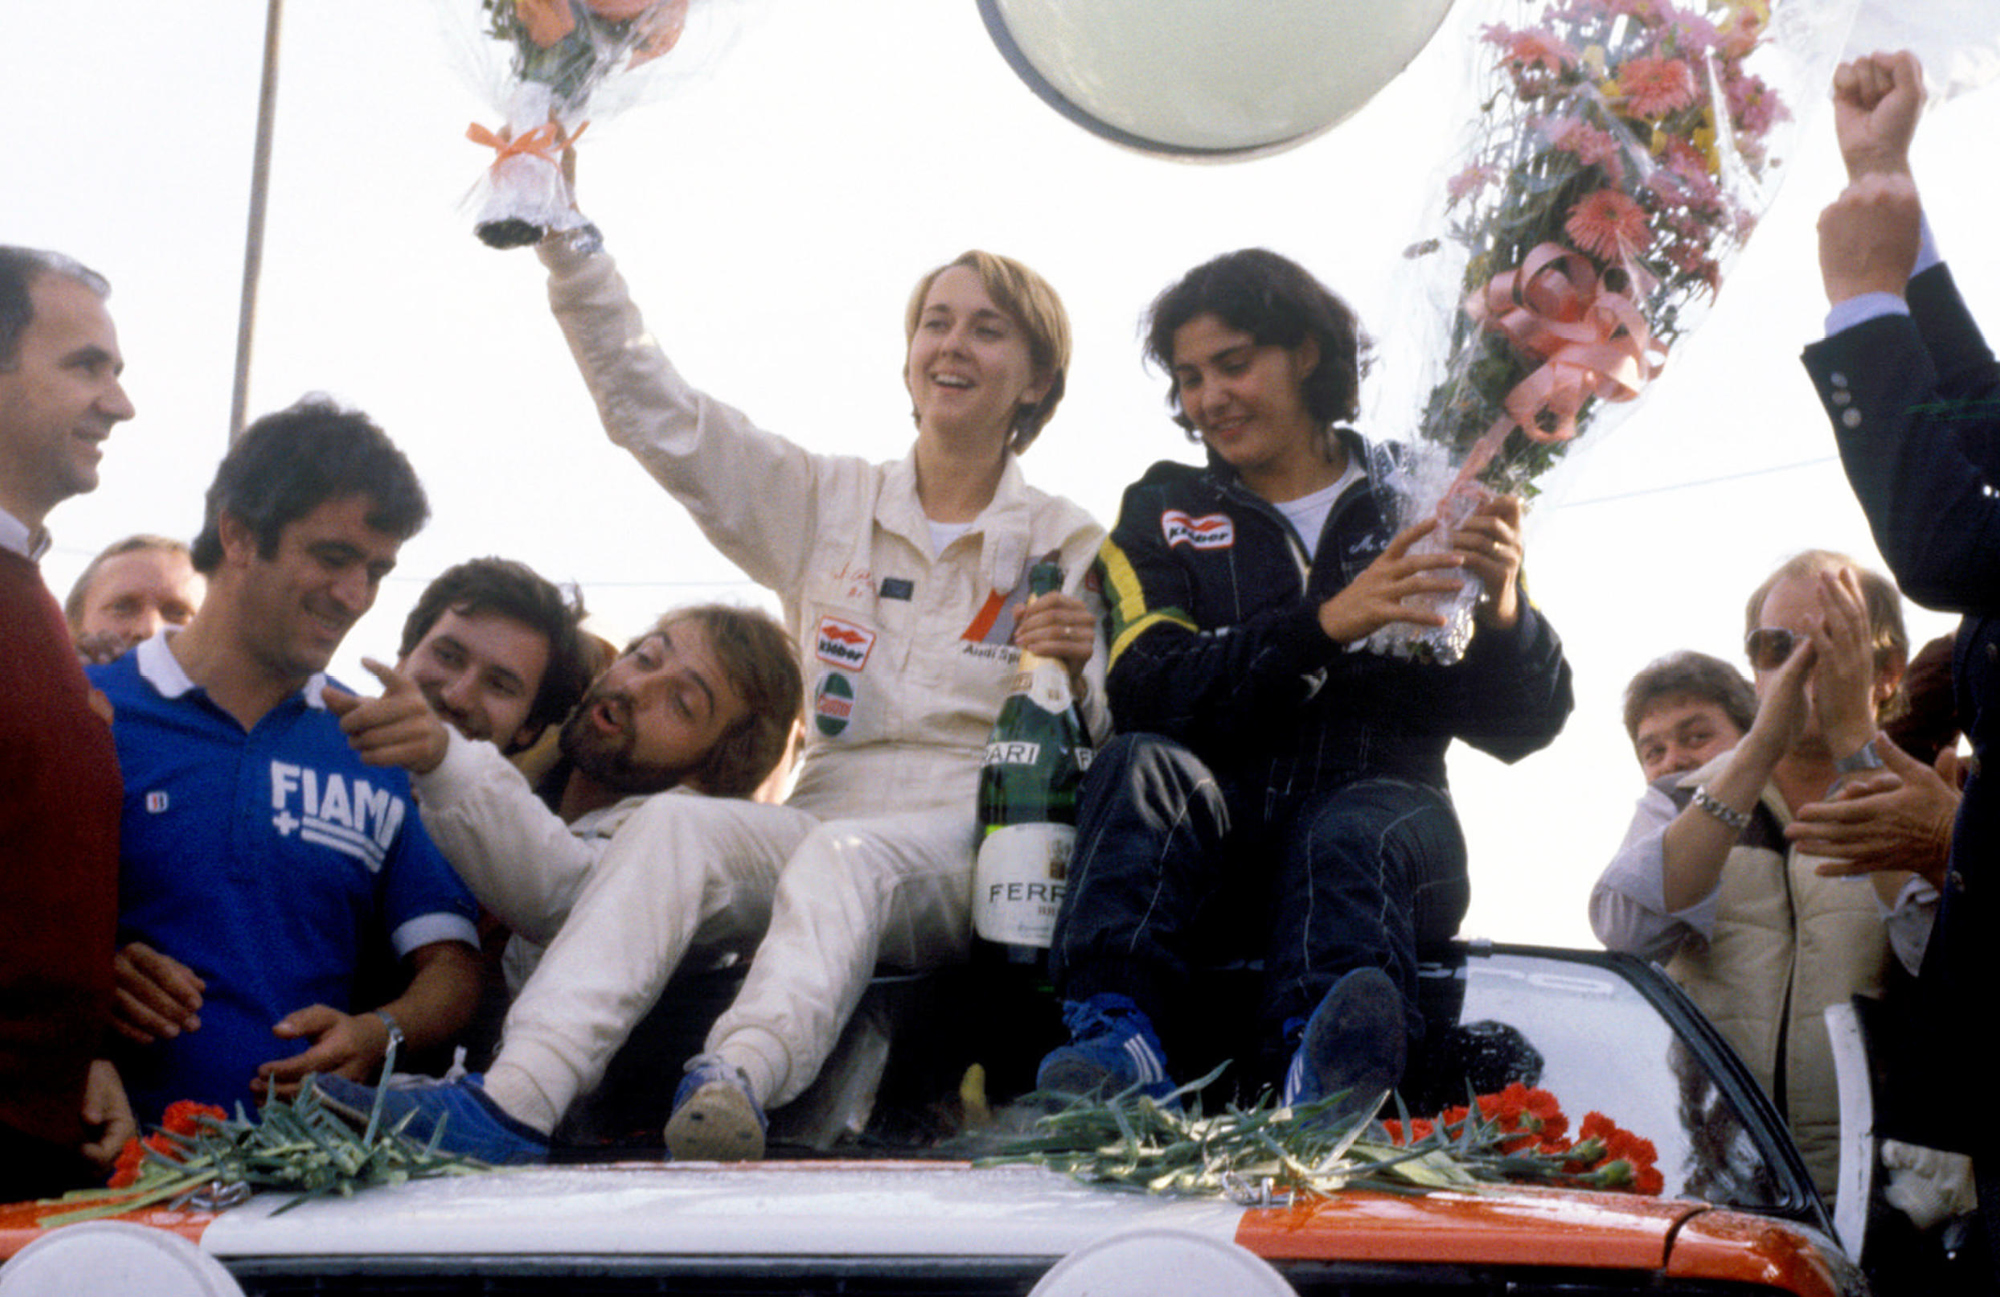 Rally drivers Fabrizia Pons and Michèle Mouton at Rallye Sanremo in 1981